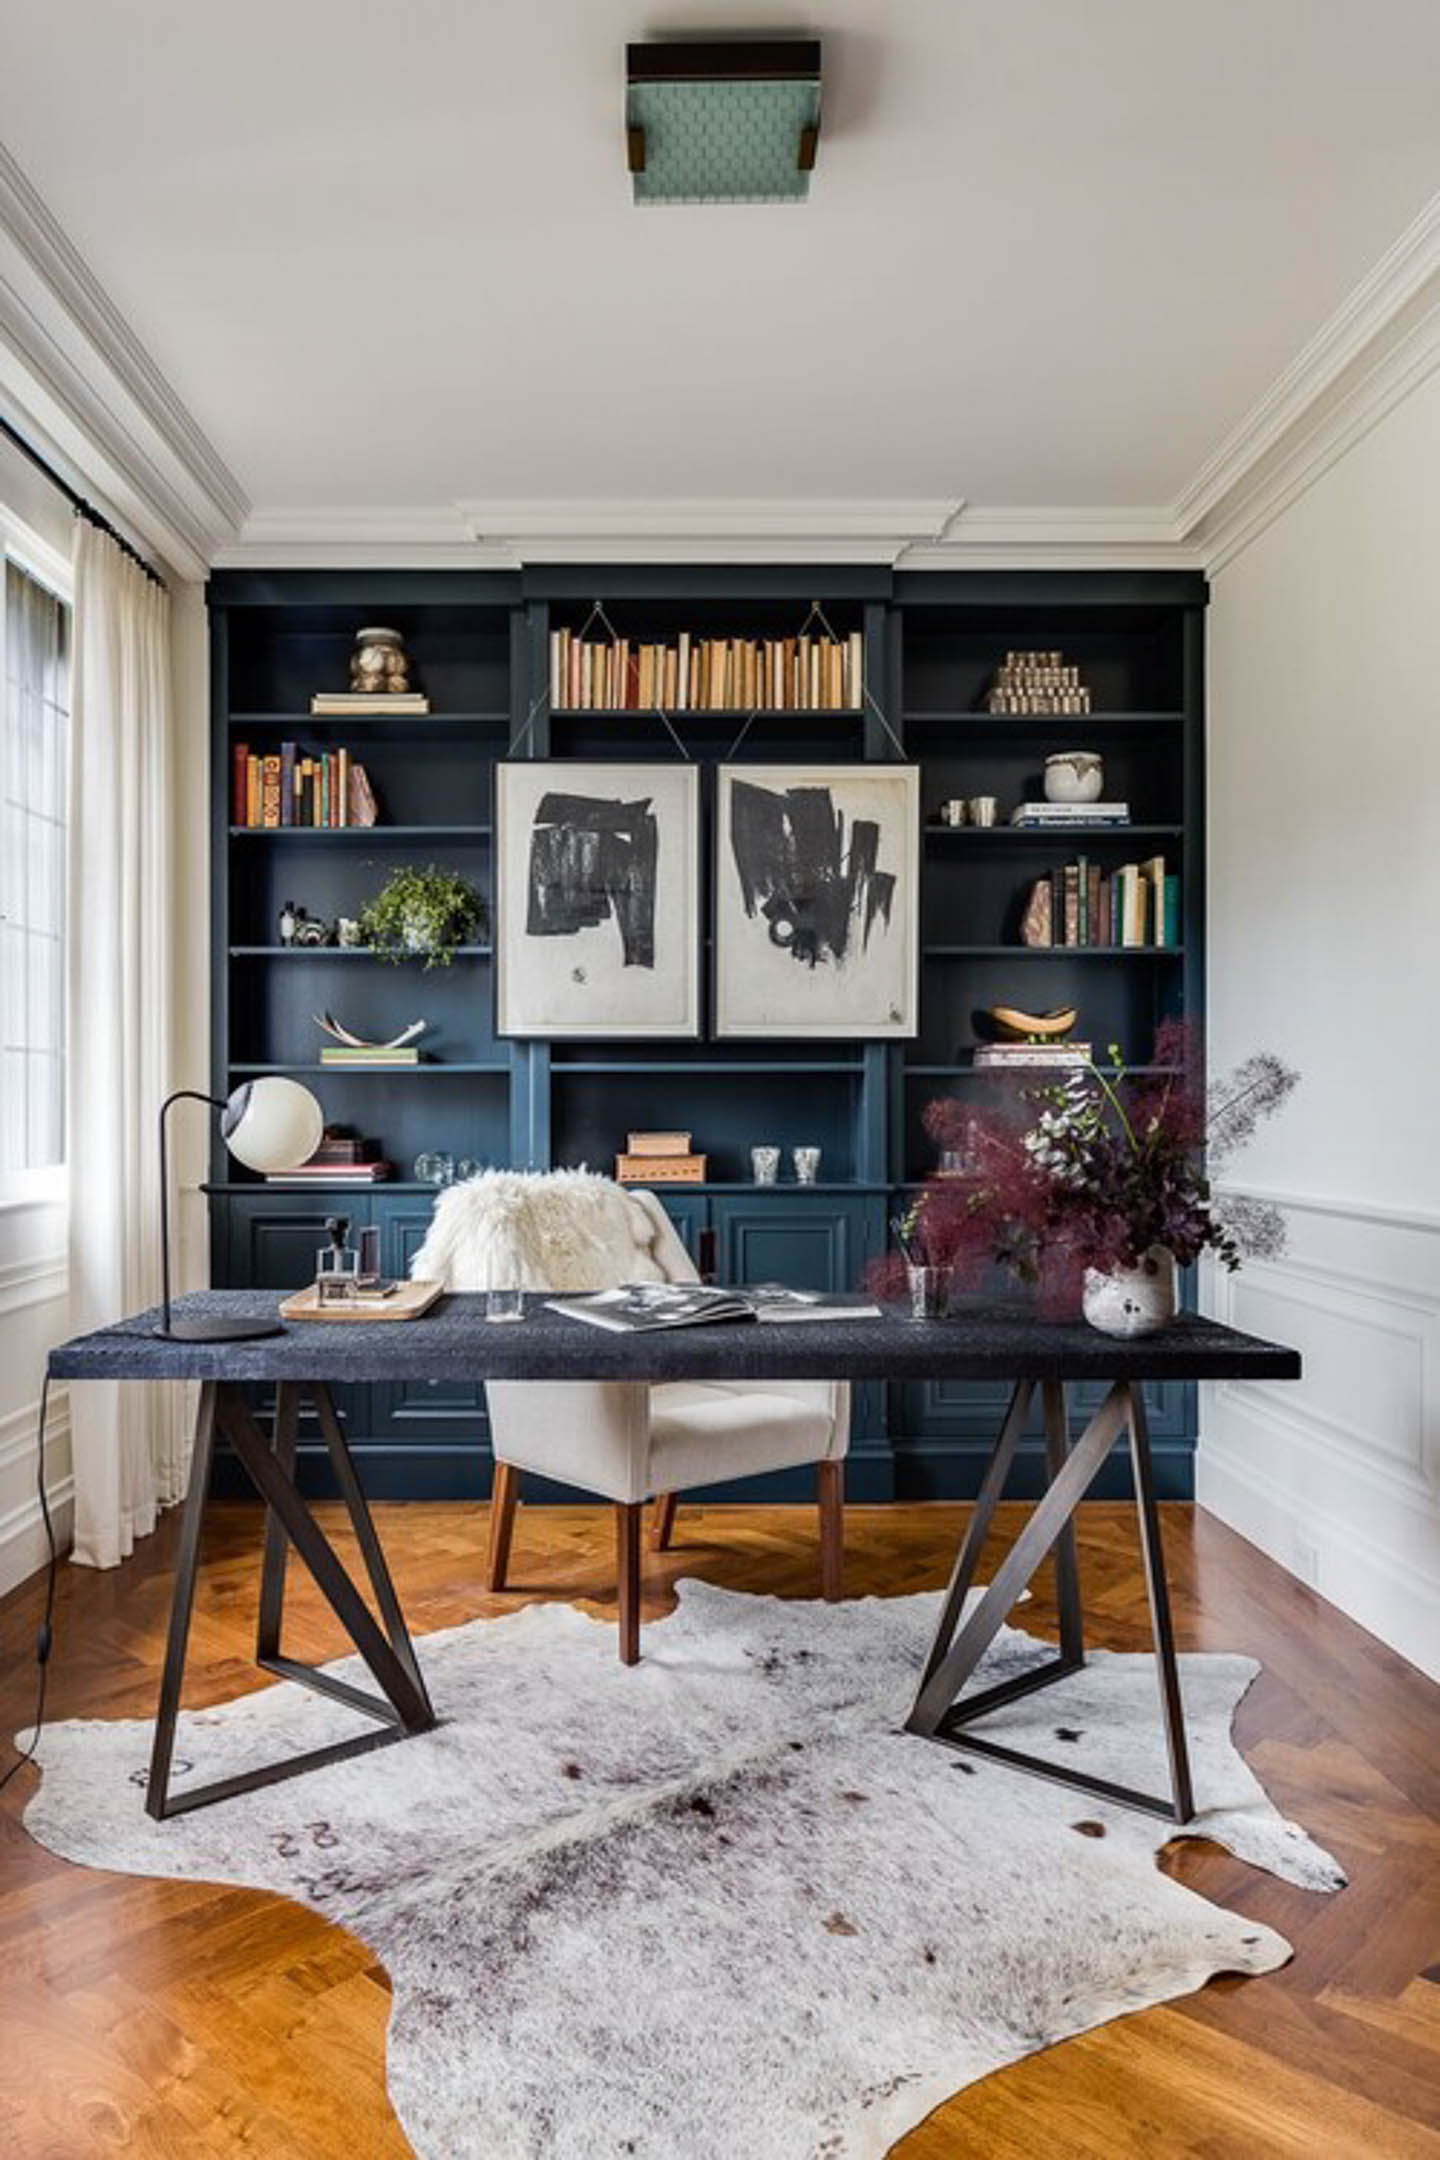 Small home office with dark blue shelves across one end, a black desk in front and walls painted white